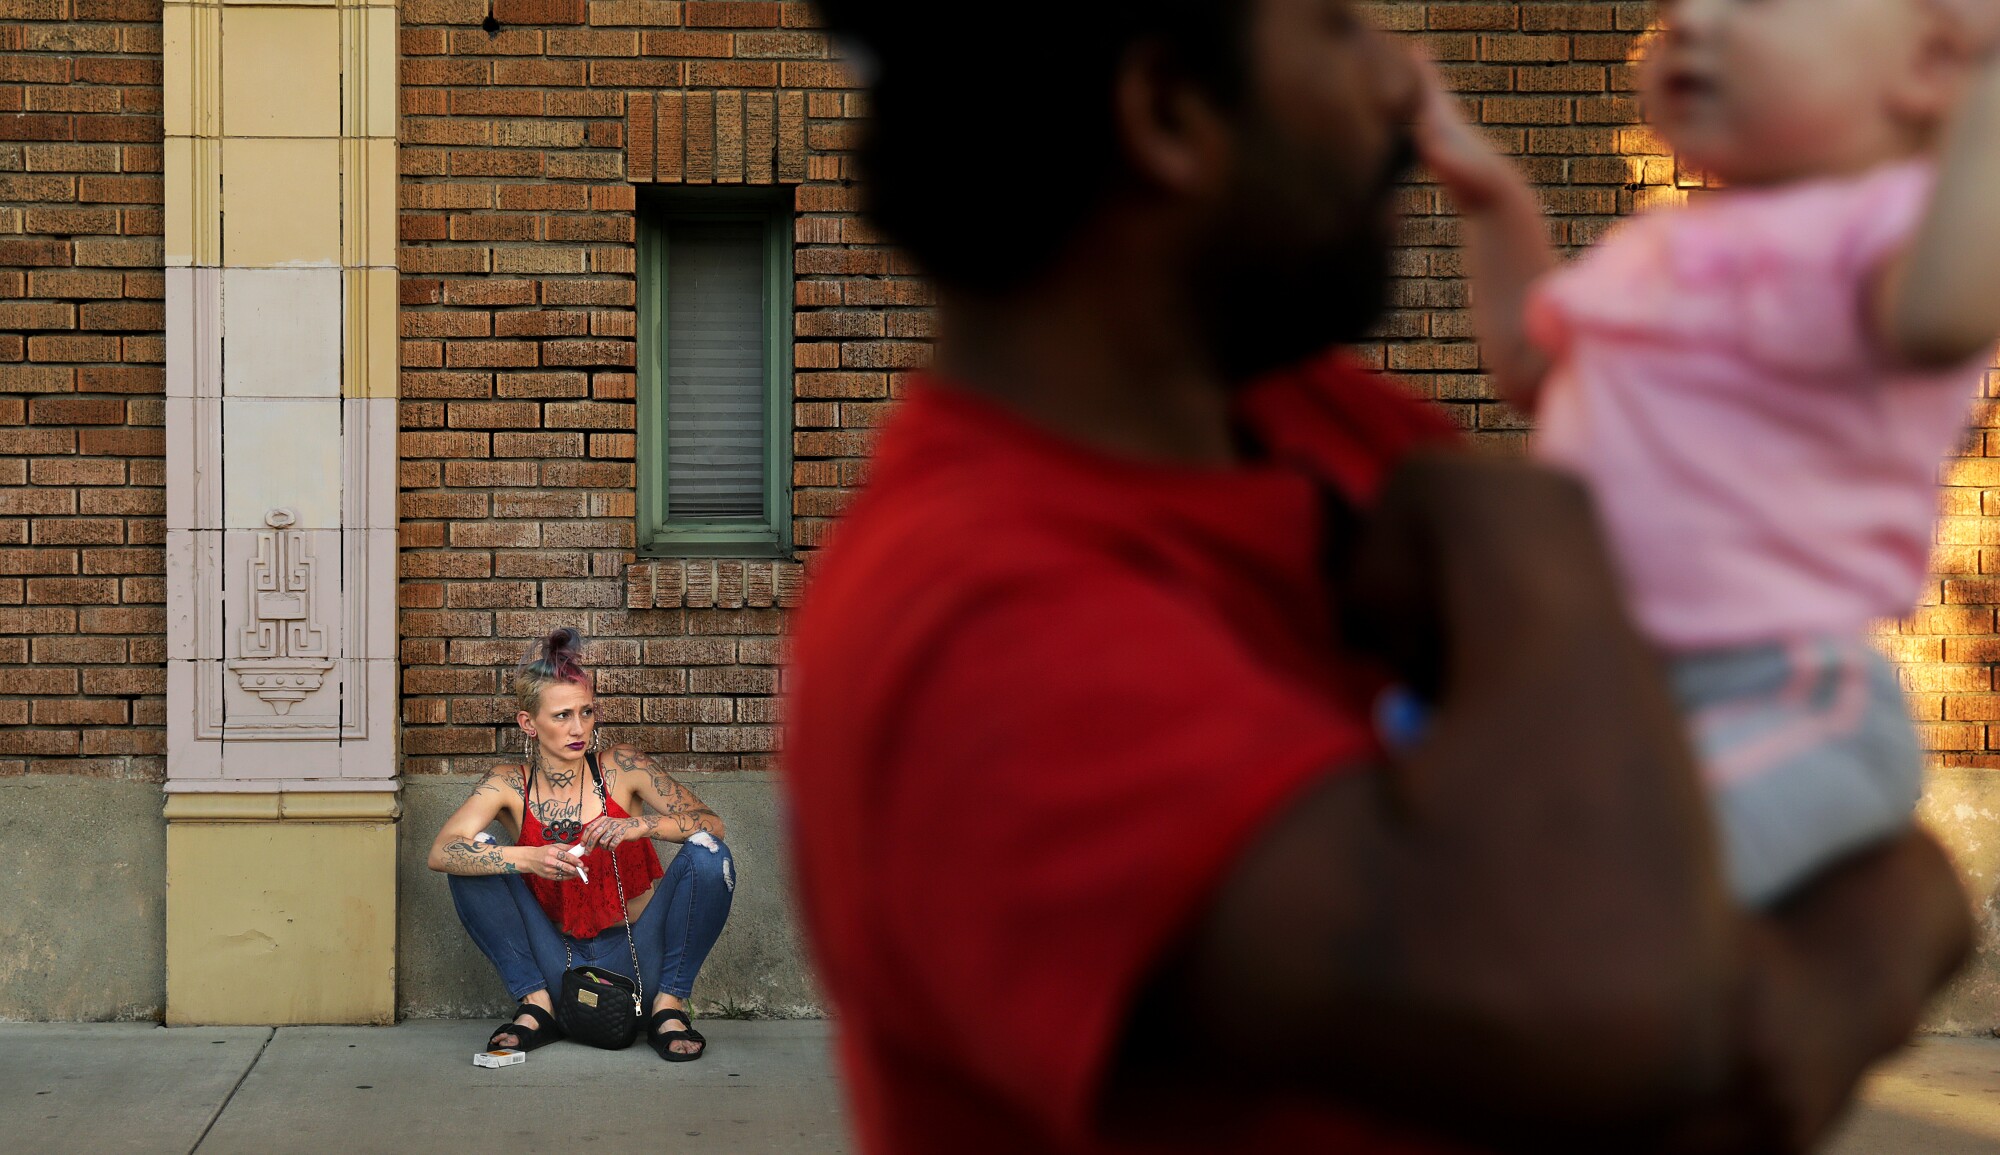 A woman sits against a wall in back as a man holds a baby slightly blurred in the foreground